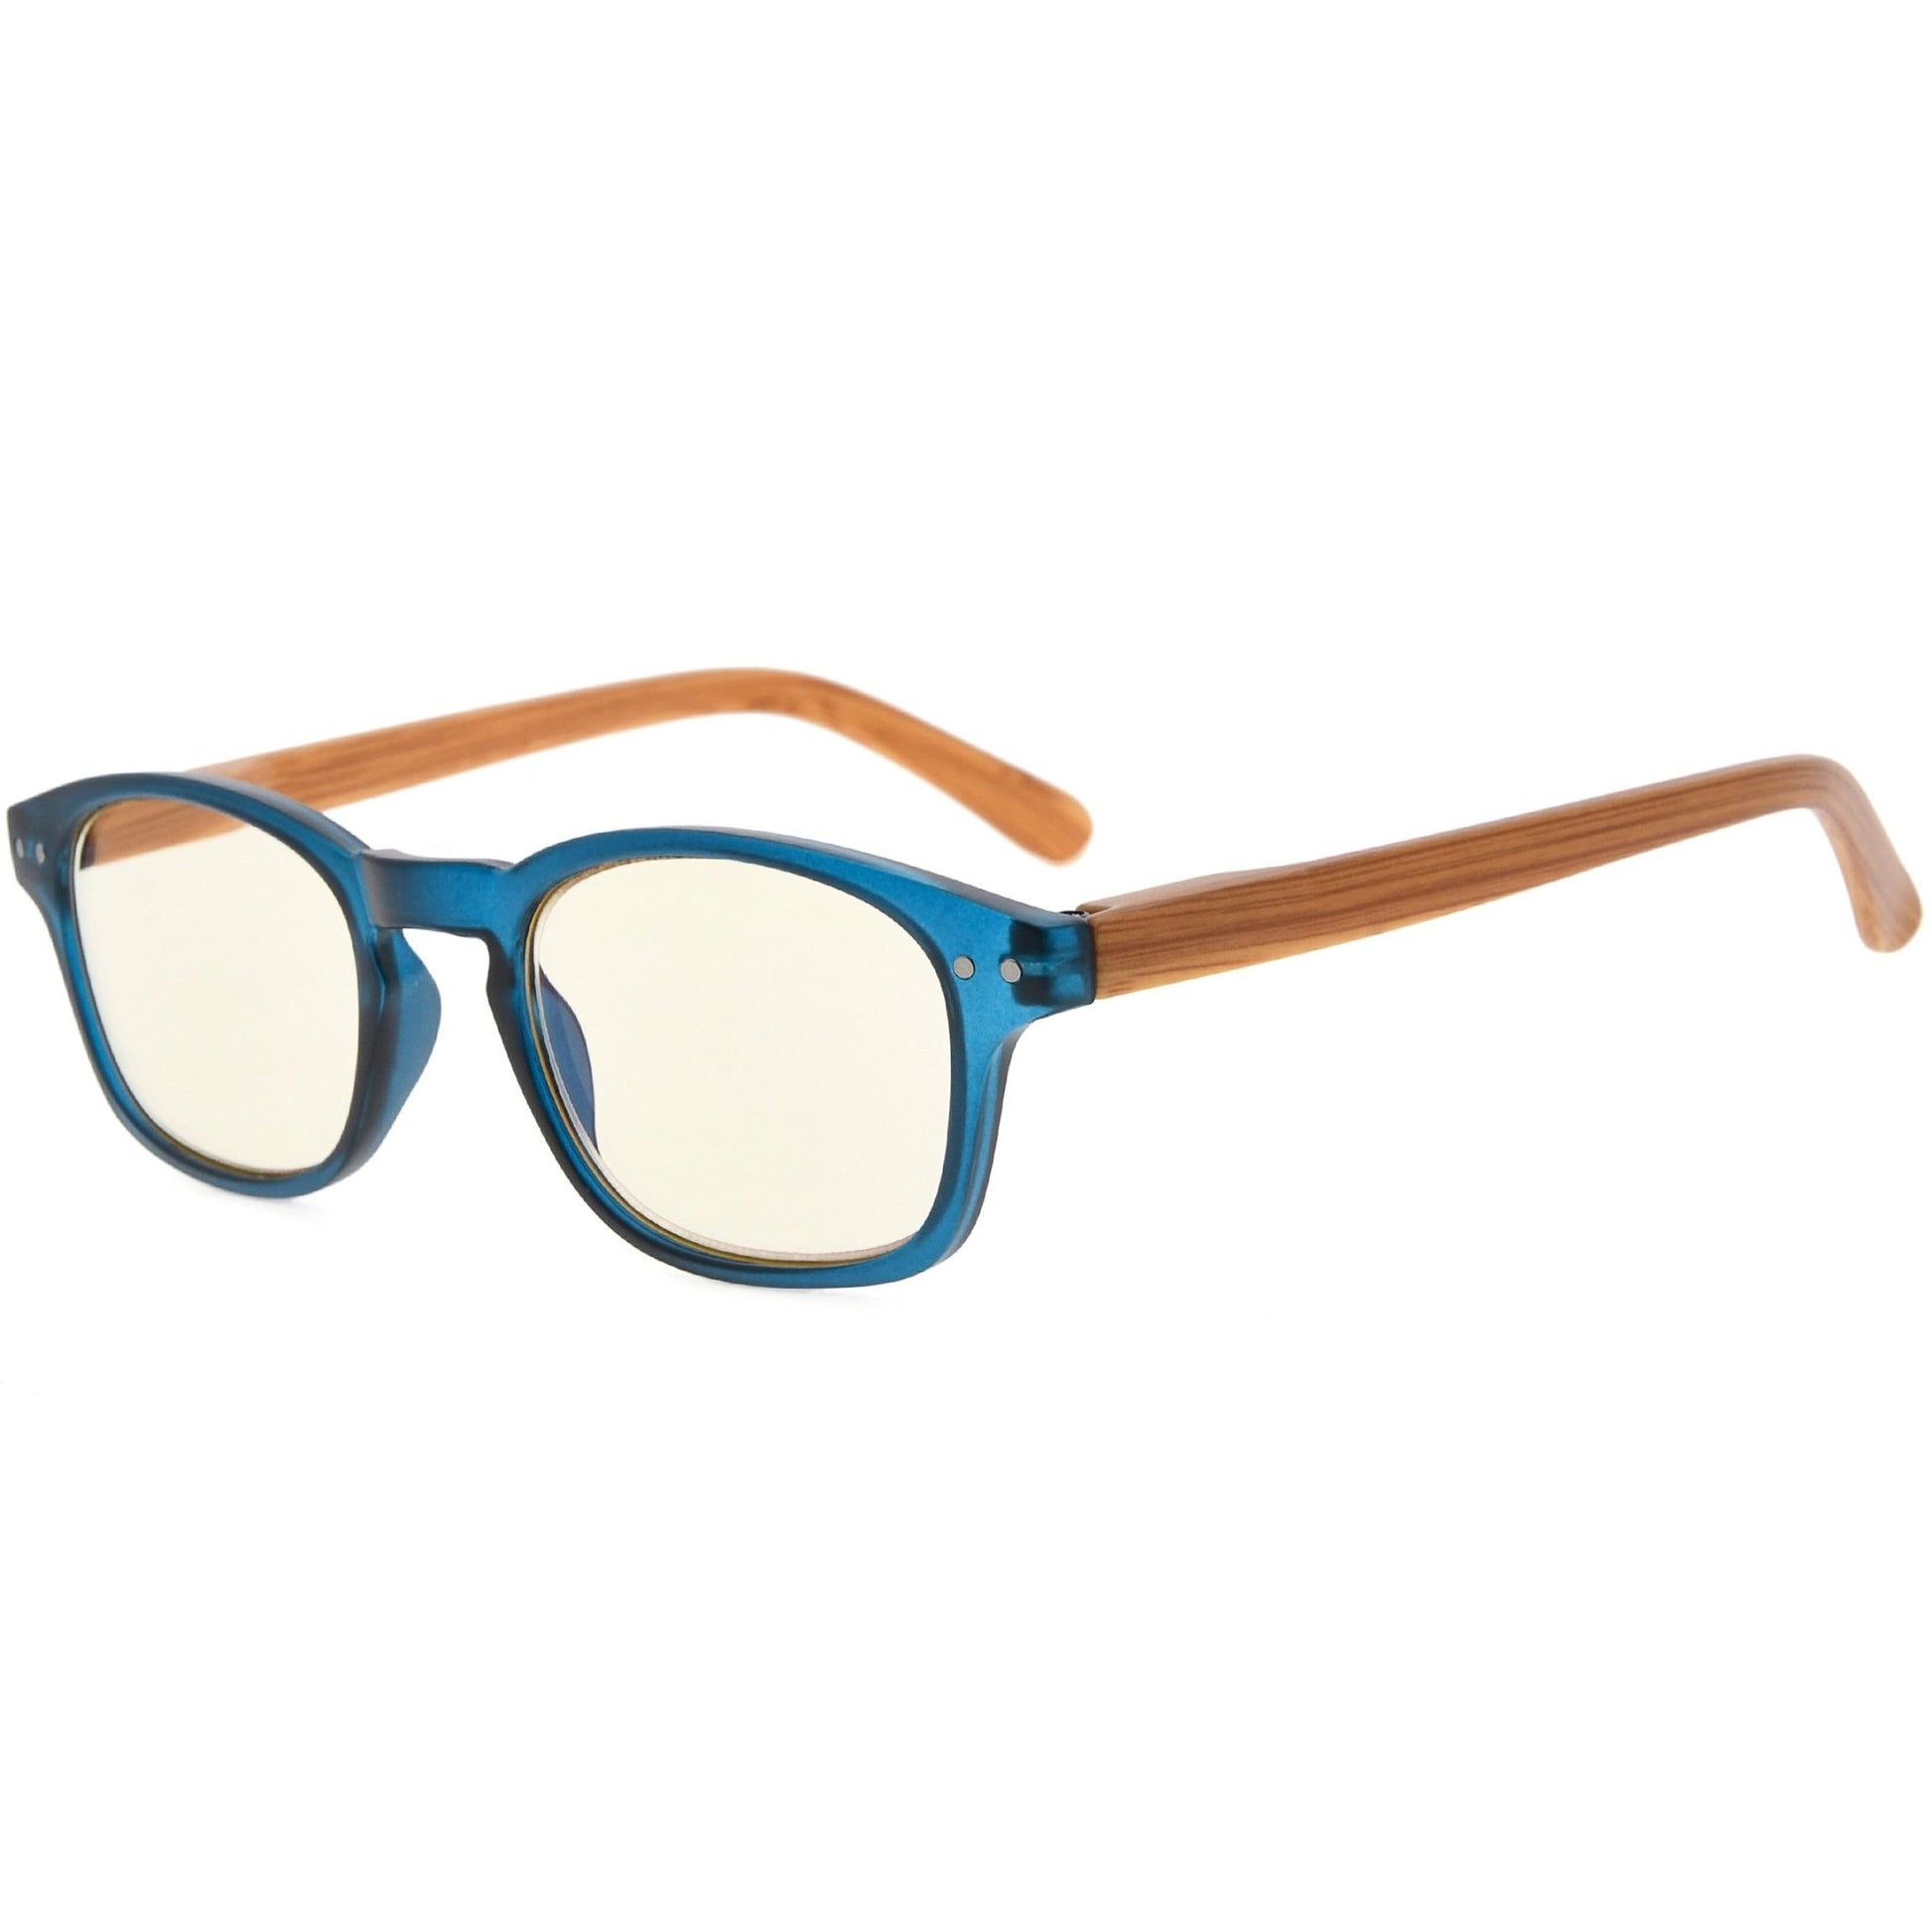 Bamboo-look Temples Computer Reading Glasses Blue CG034